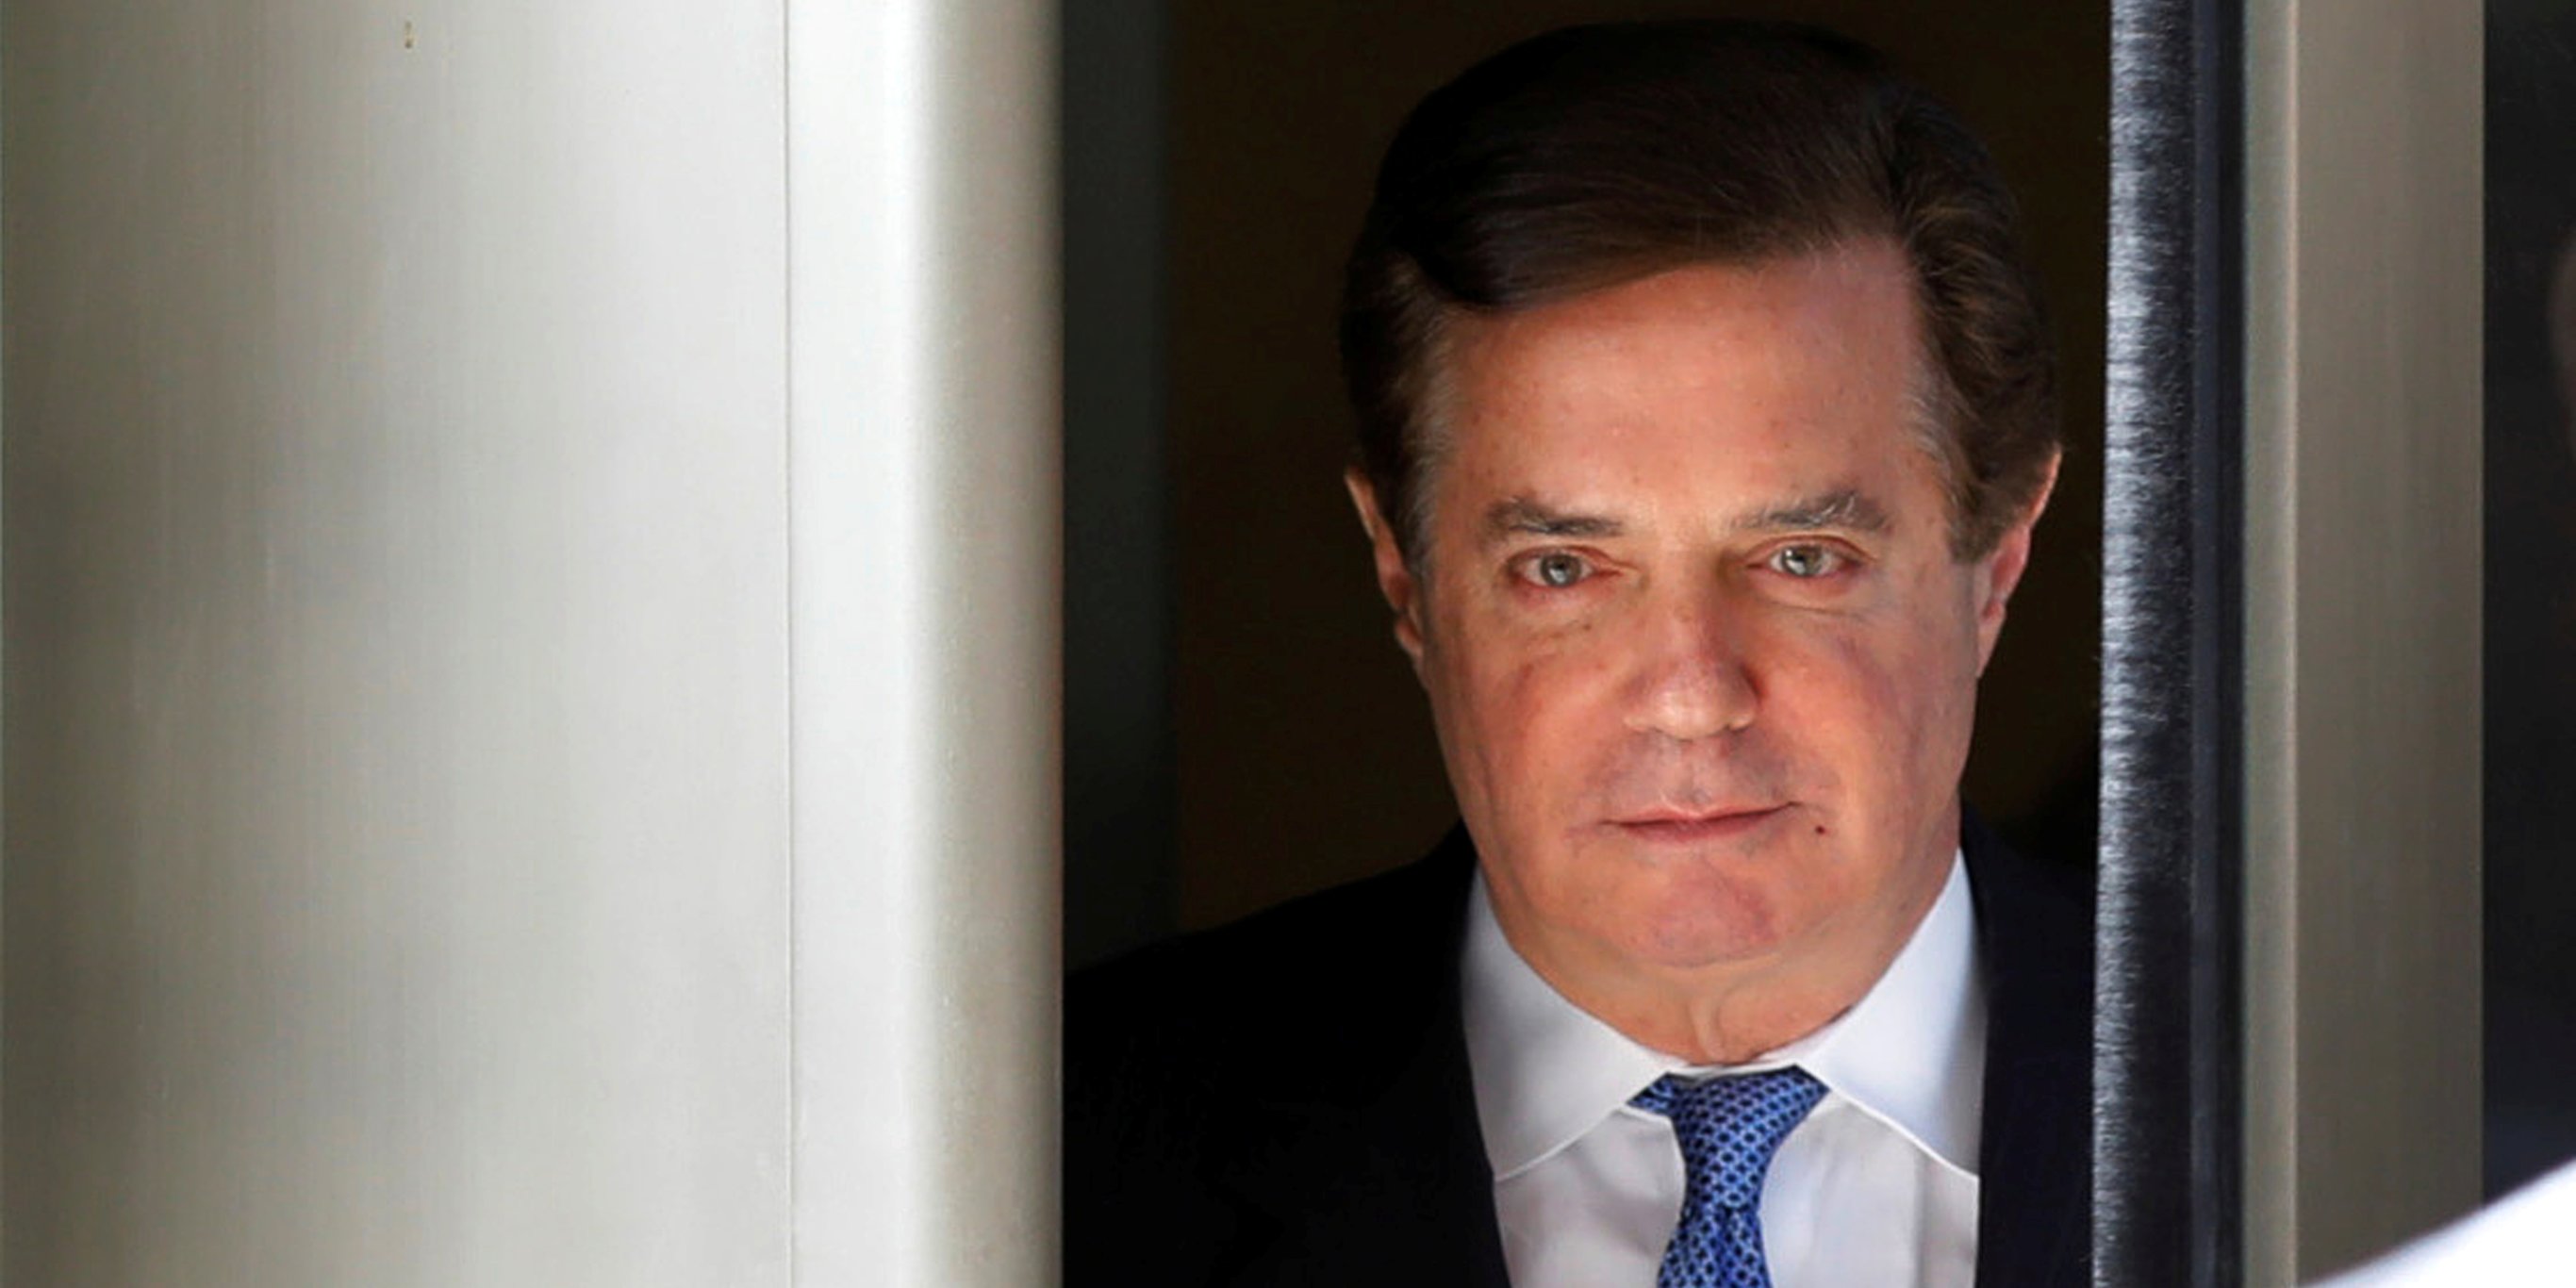 Paul Manafort’s lawyers have reportedly resumed talks of a possible plea deal ahead of his second trial